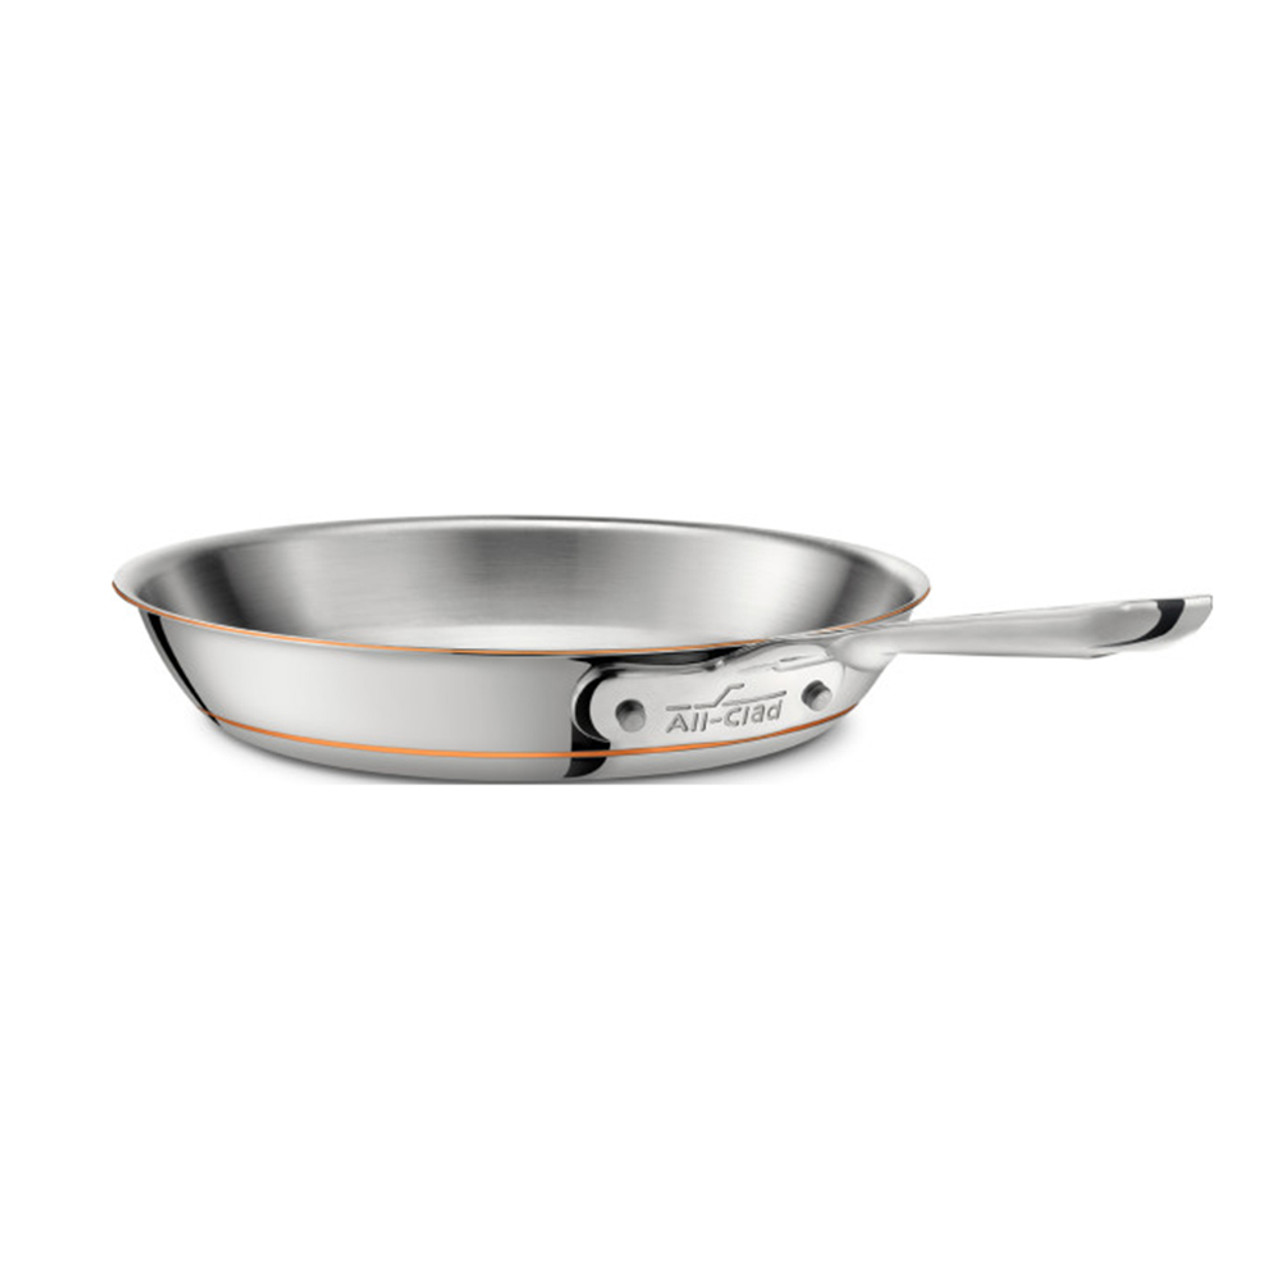 https://cdn11.bigcommerce.com/s-hccytny0od/images/stencil/1280x1280/products/506/1912/all-clad-copper-core-fry-pan-10-inch__04418.1511046668.jpg?c=2?imbypass=on